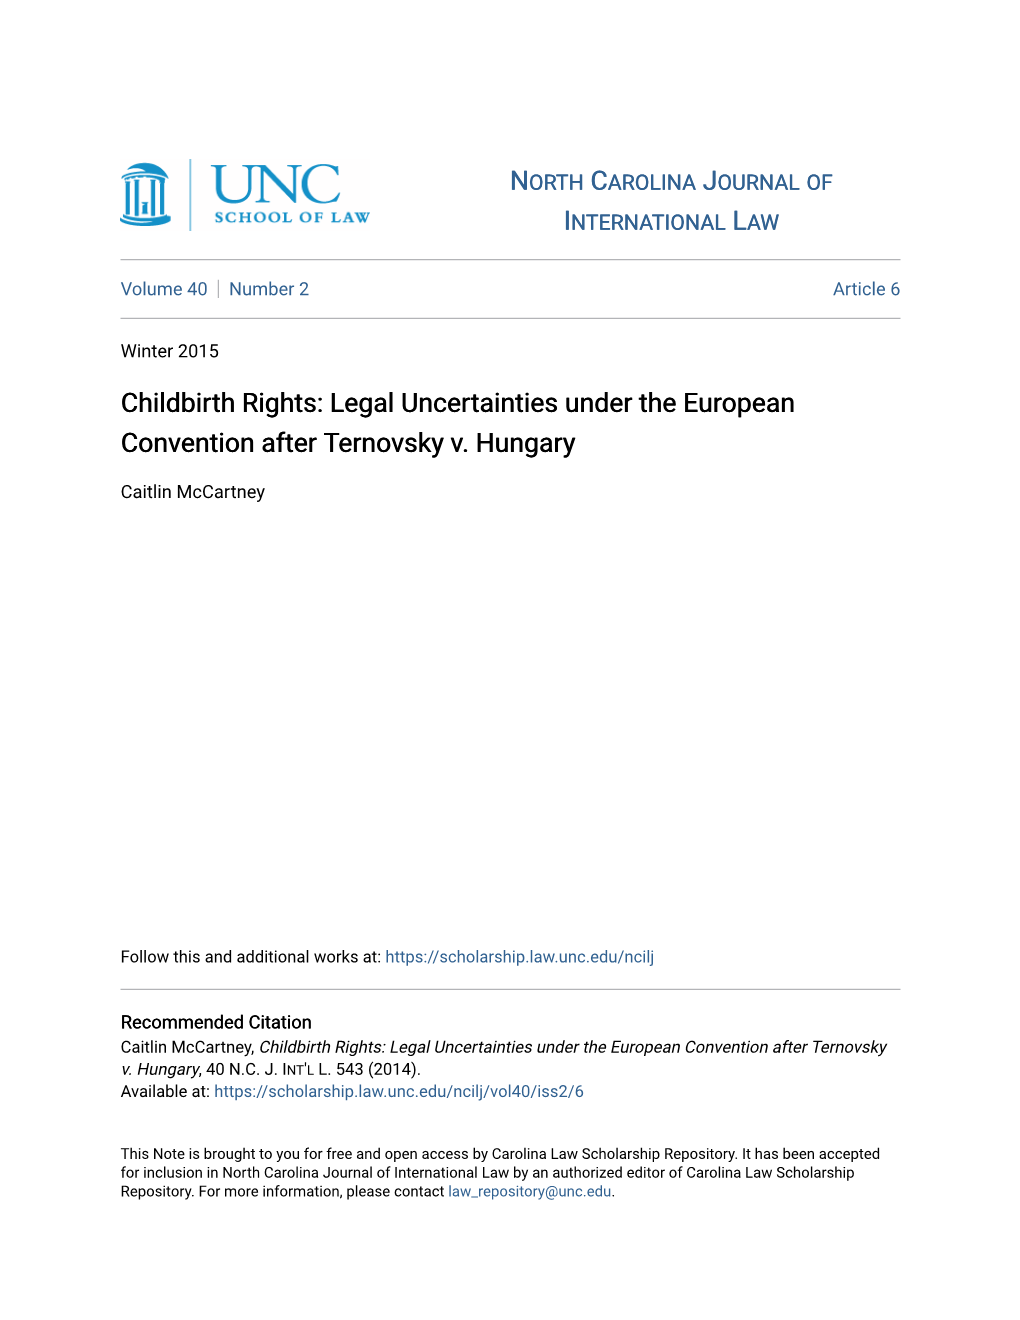 Childbirth Rights: Legal Uncertainties Under the European Convention After Ternovsky V